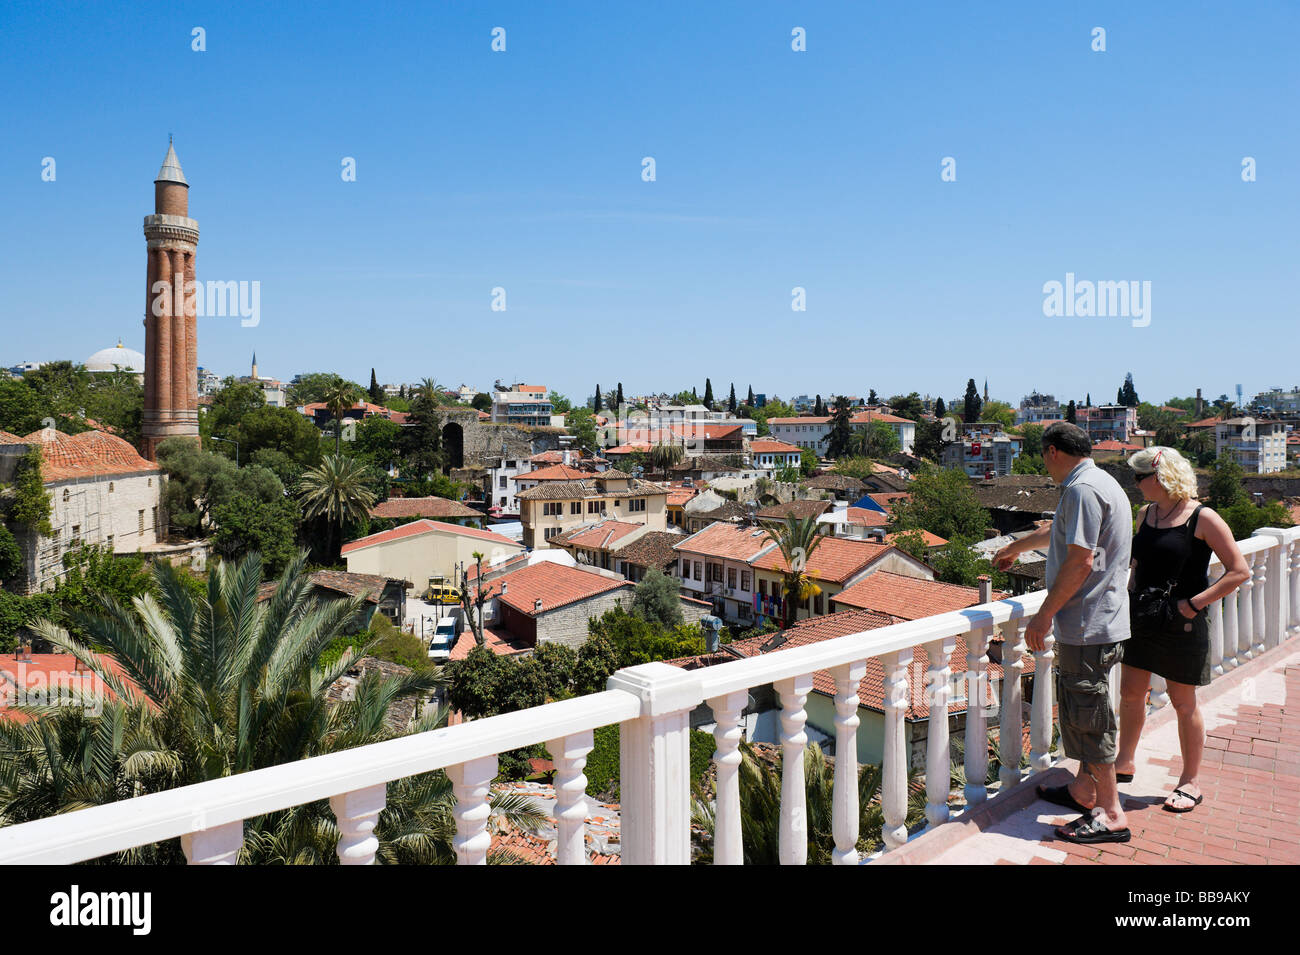 View of the Yivli Minare (Fluted Minaret) above the roofs of Kaleici (the OldTown), Antalya, Mediterranean Coast, Turkey Stock Photo